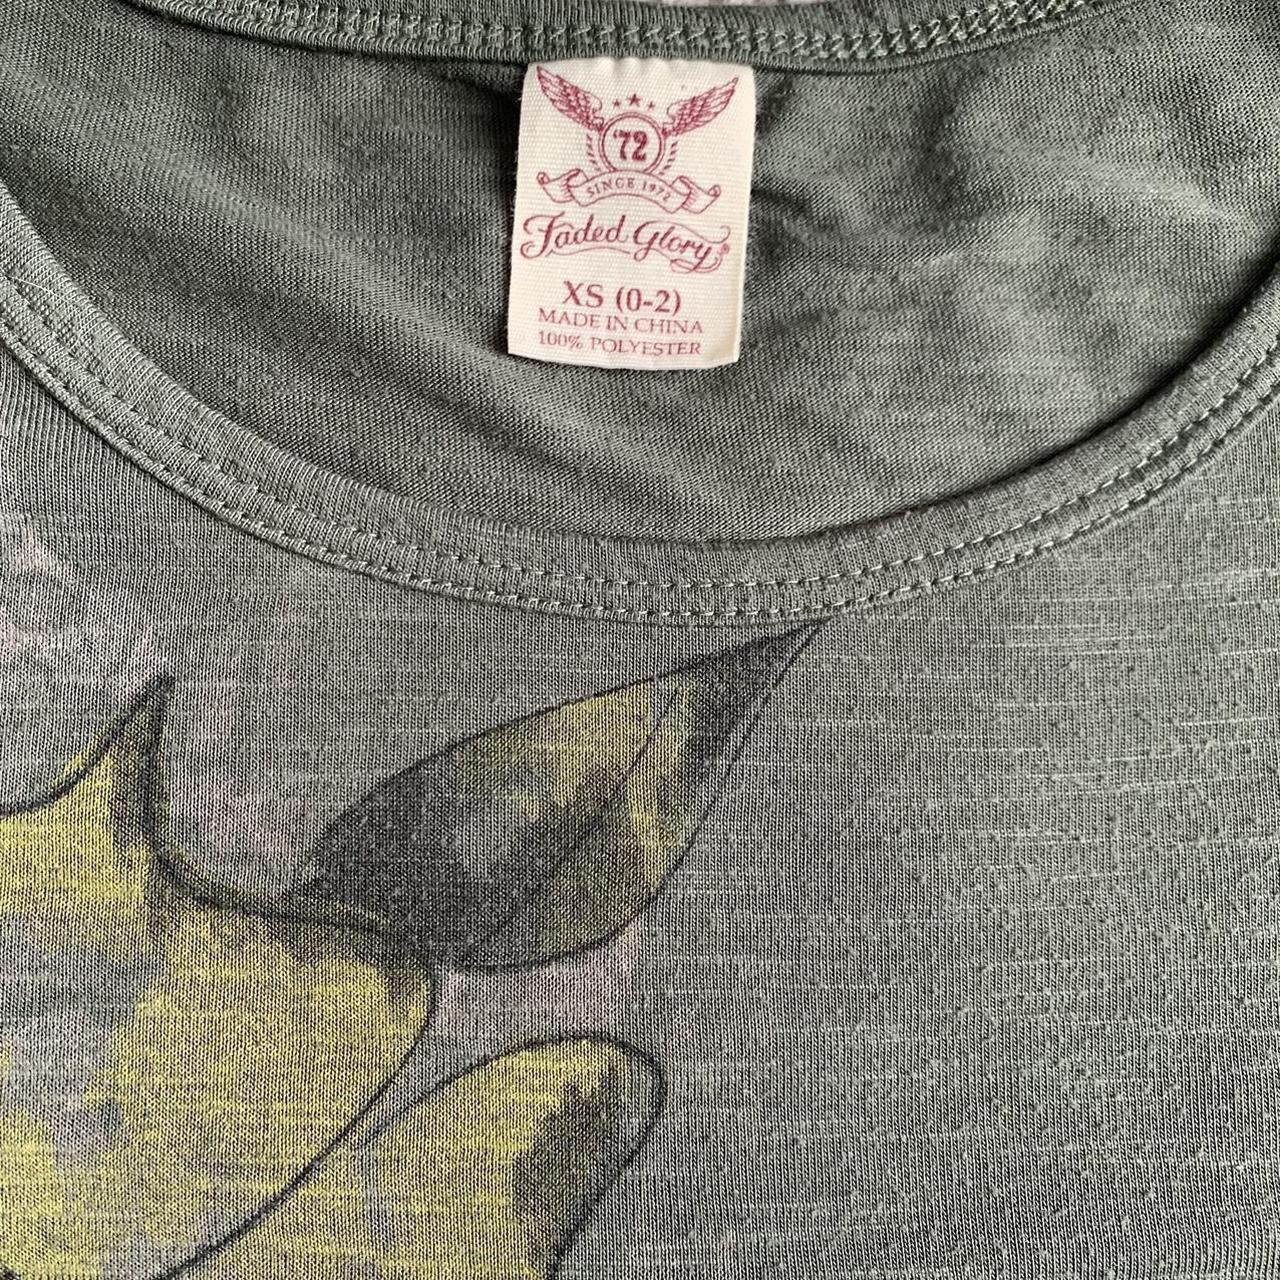 fairy top Olive Green fairycore floral print top... - Depop